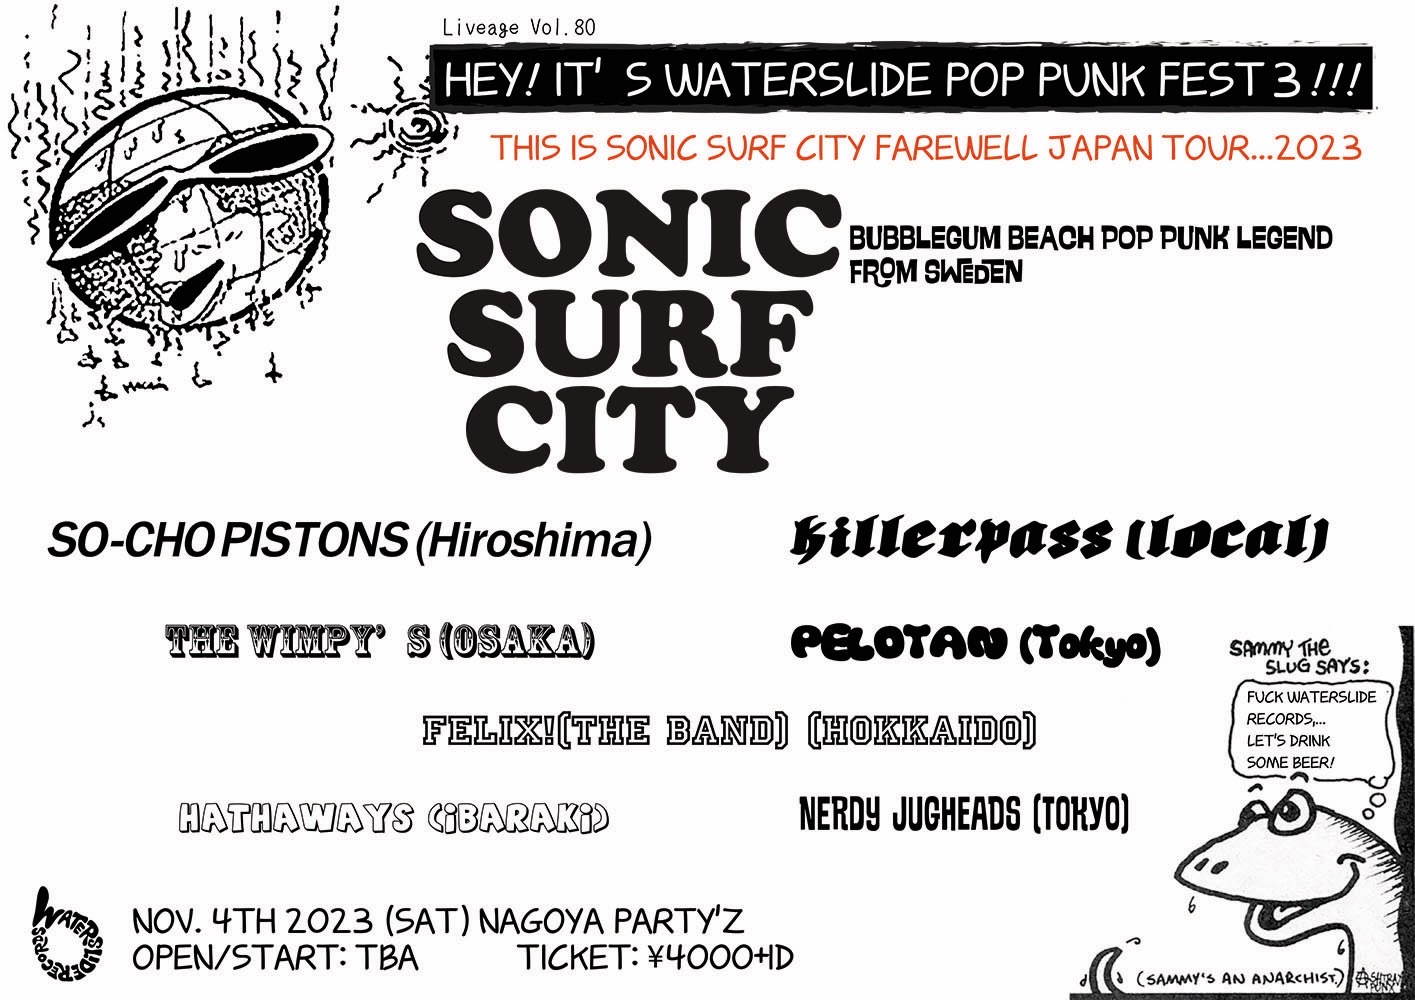 Liveage Vol.80 THIS IS SONIC SURF CITY FAREWELL JAPAN TOUR...2023